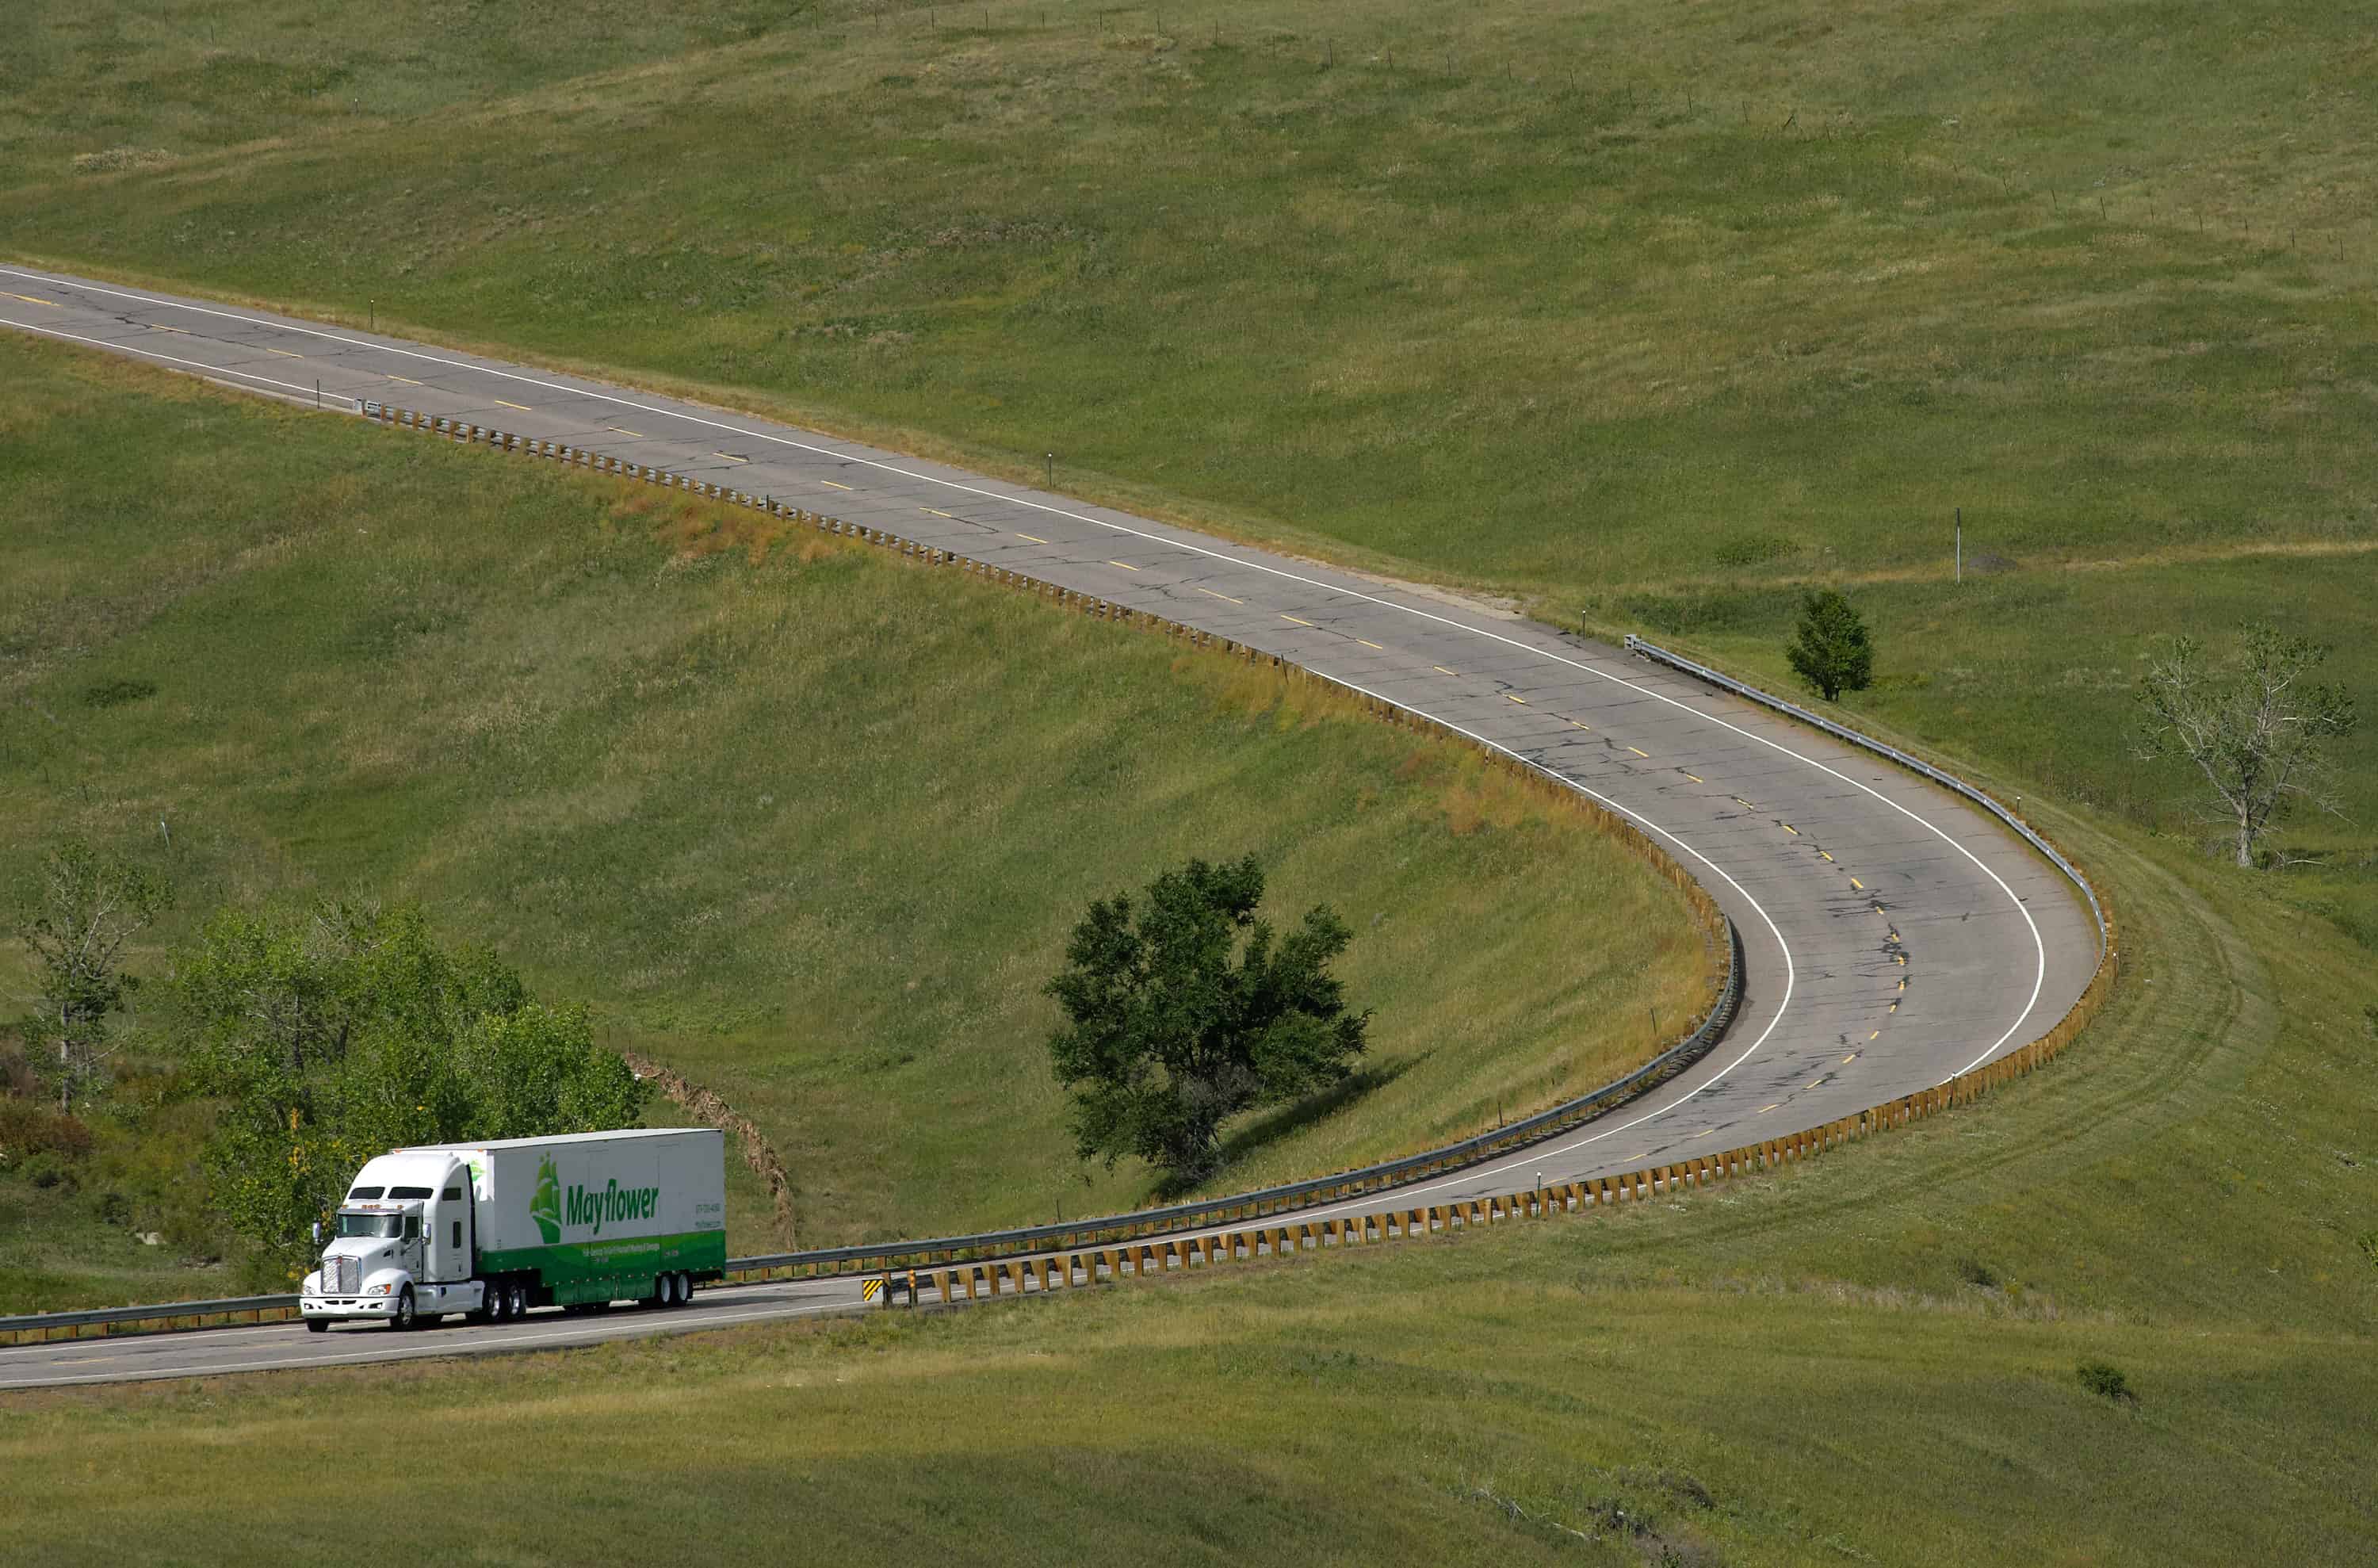 Mayflower moving truck driving down a rural highway surrounded by grassy areas